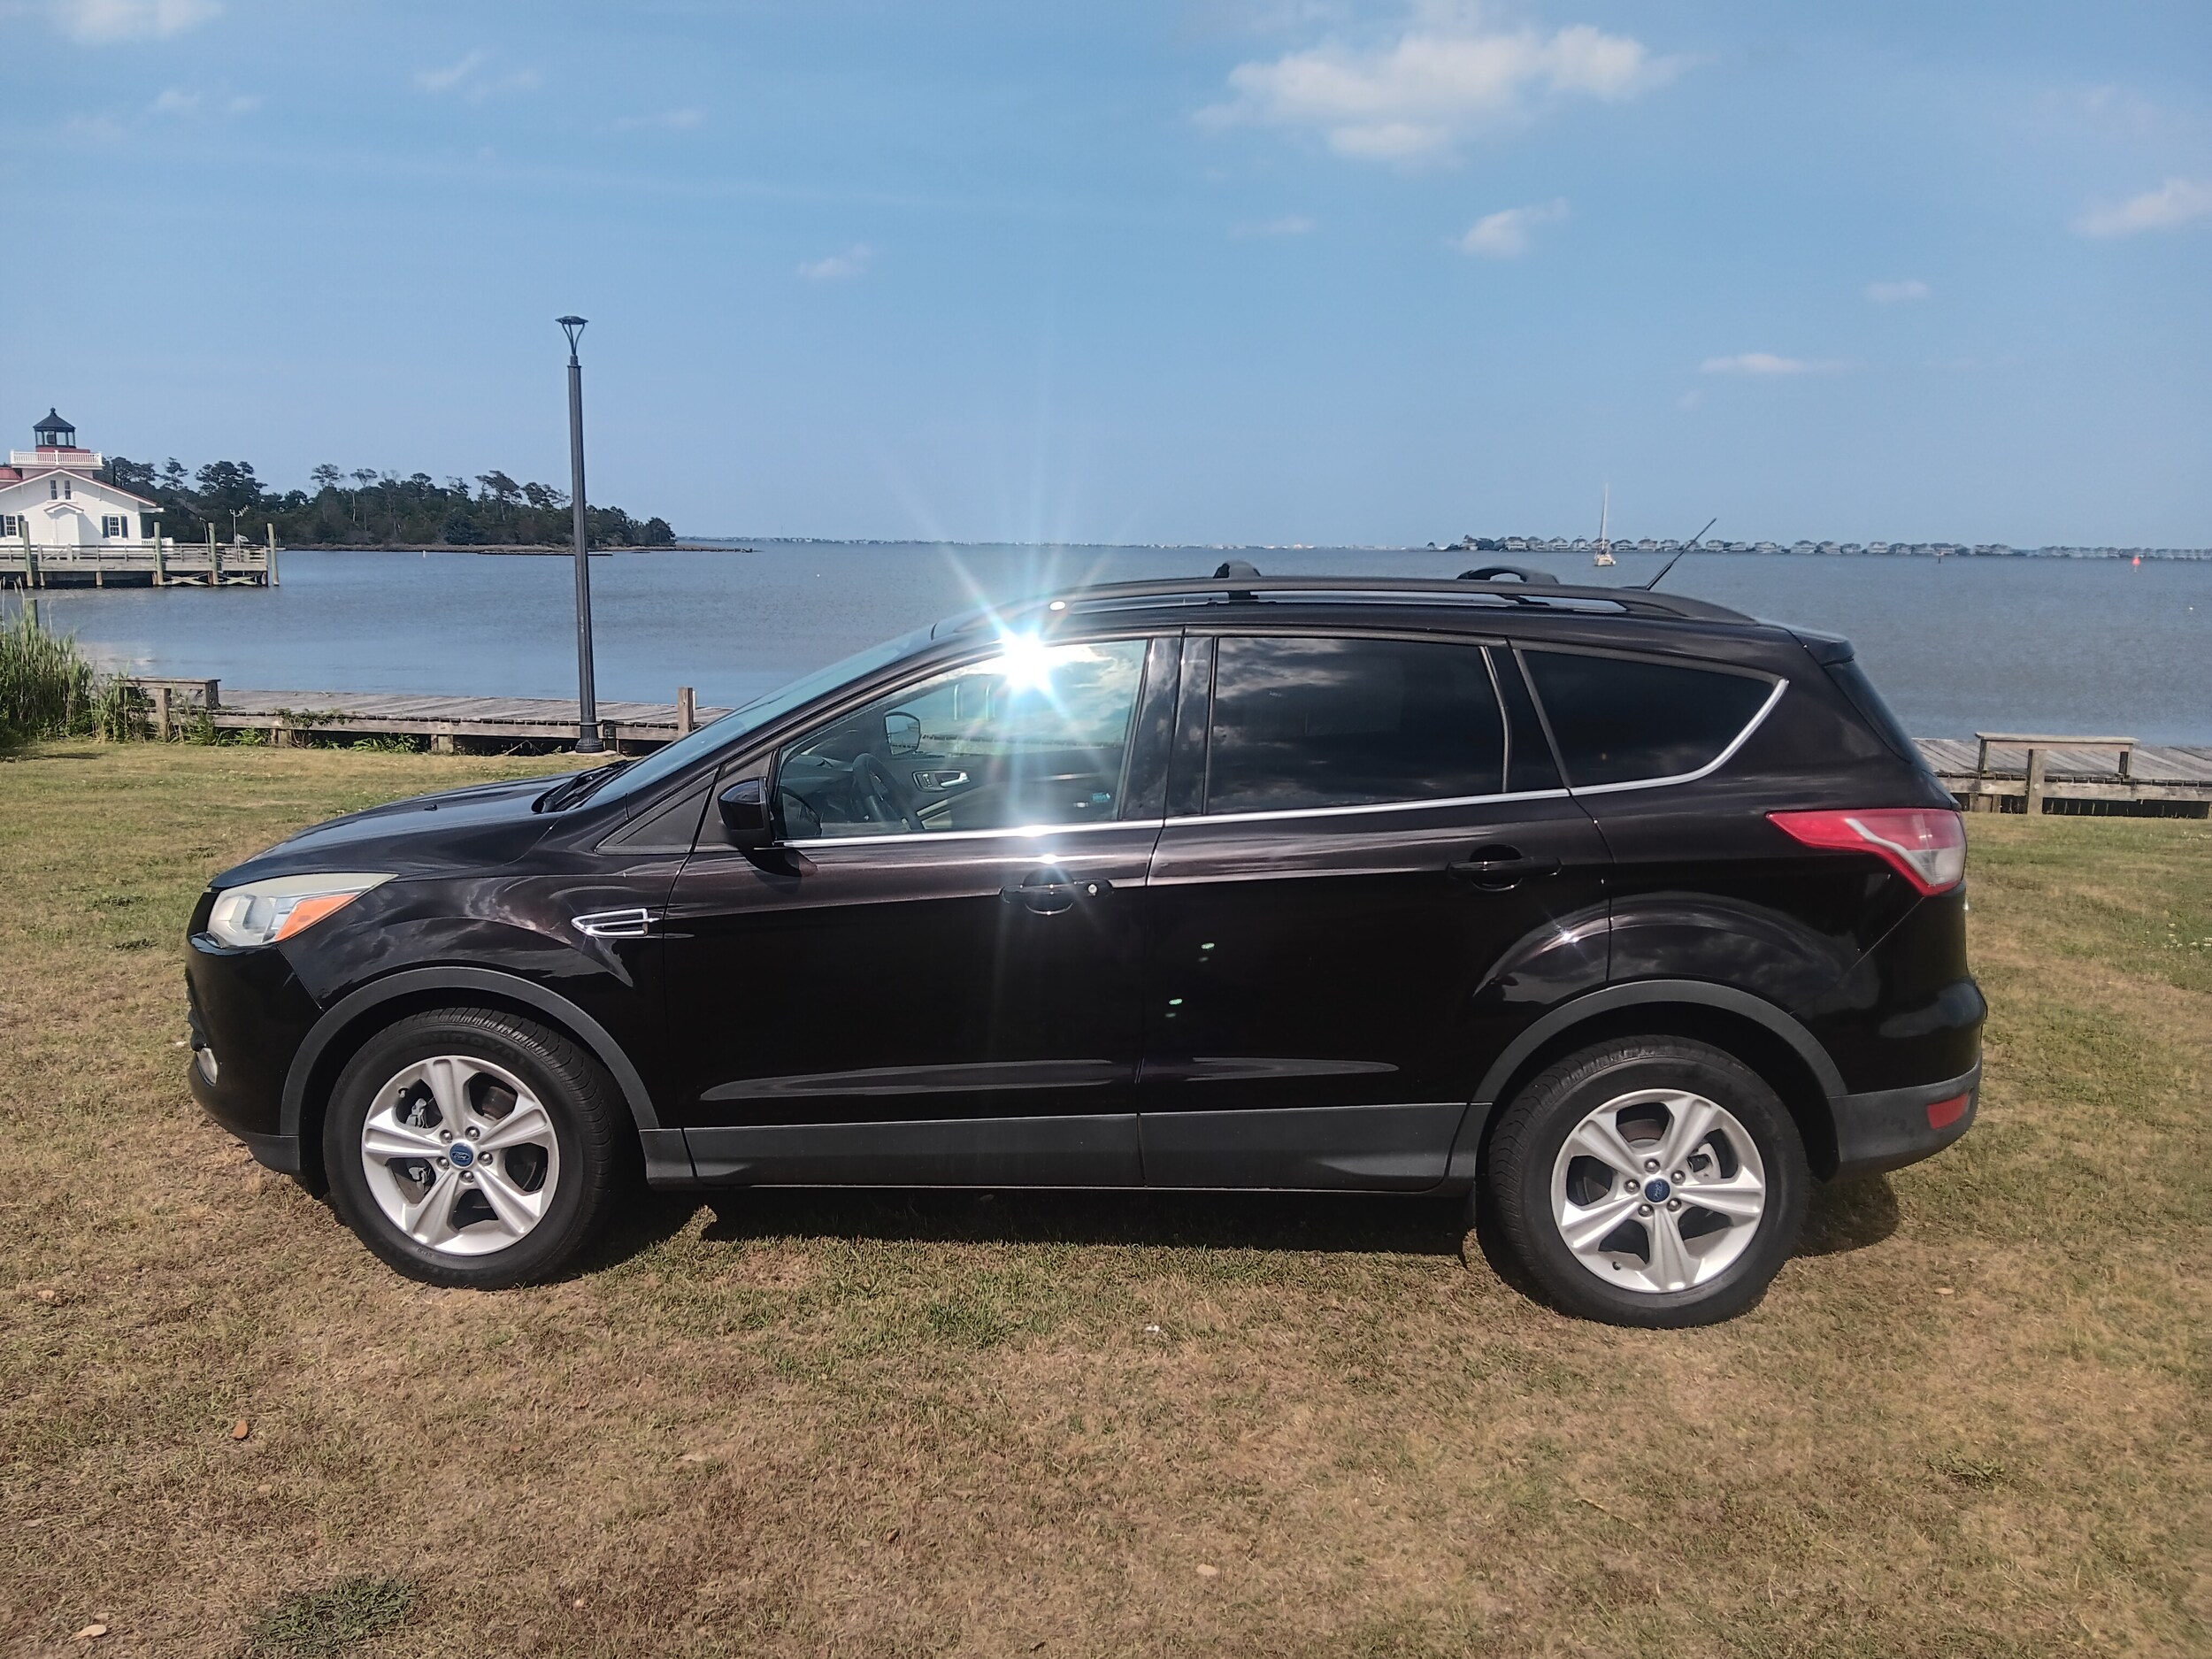 Used 2013 Ford Escape SE with VIN 1FMCU0GX3DUB12600 for sale in Manteo, NC